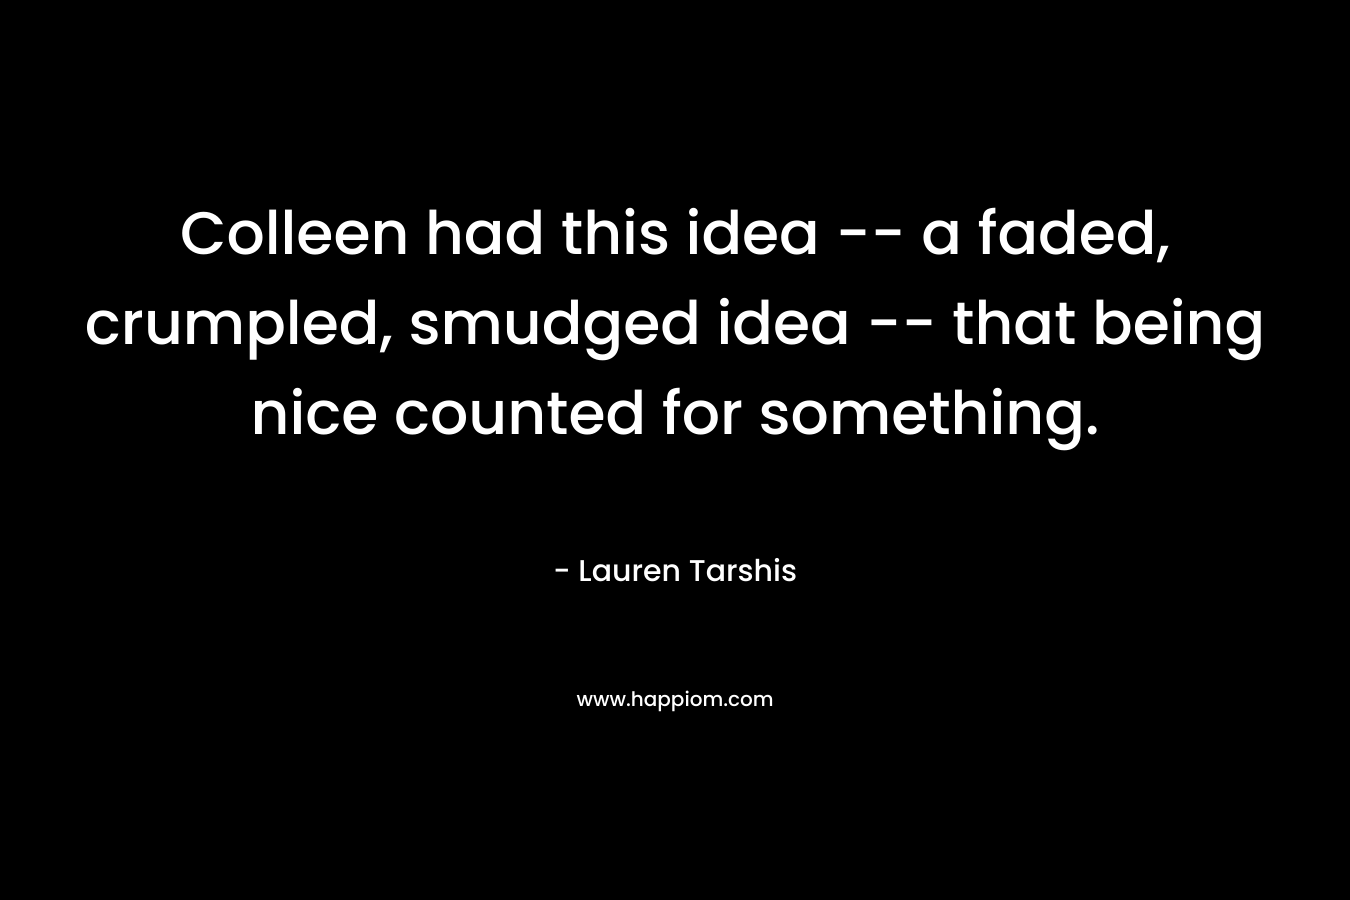 Colleen had this idea -- a faded, crumpled, smudged idea -- that being nice counted for something.